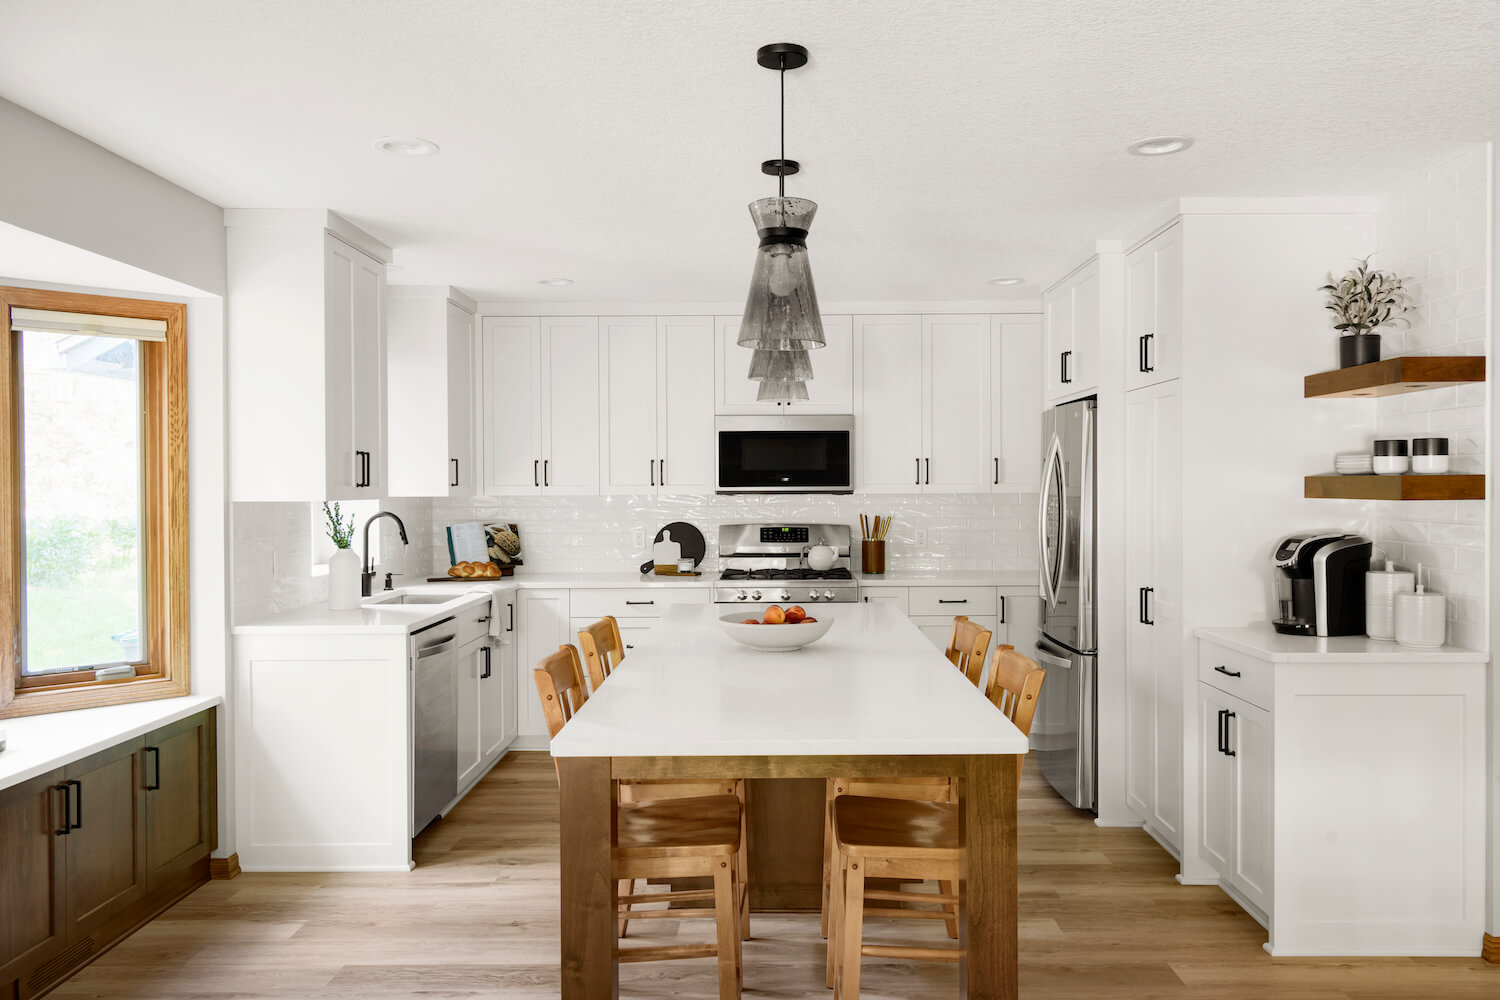 A kitchen with white cabinets and counters